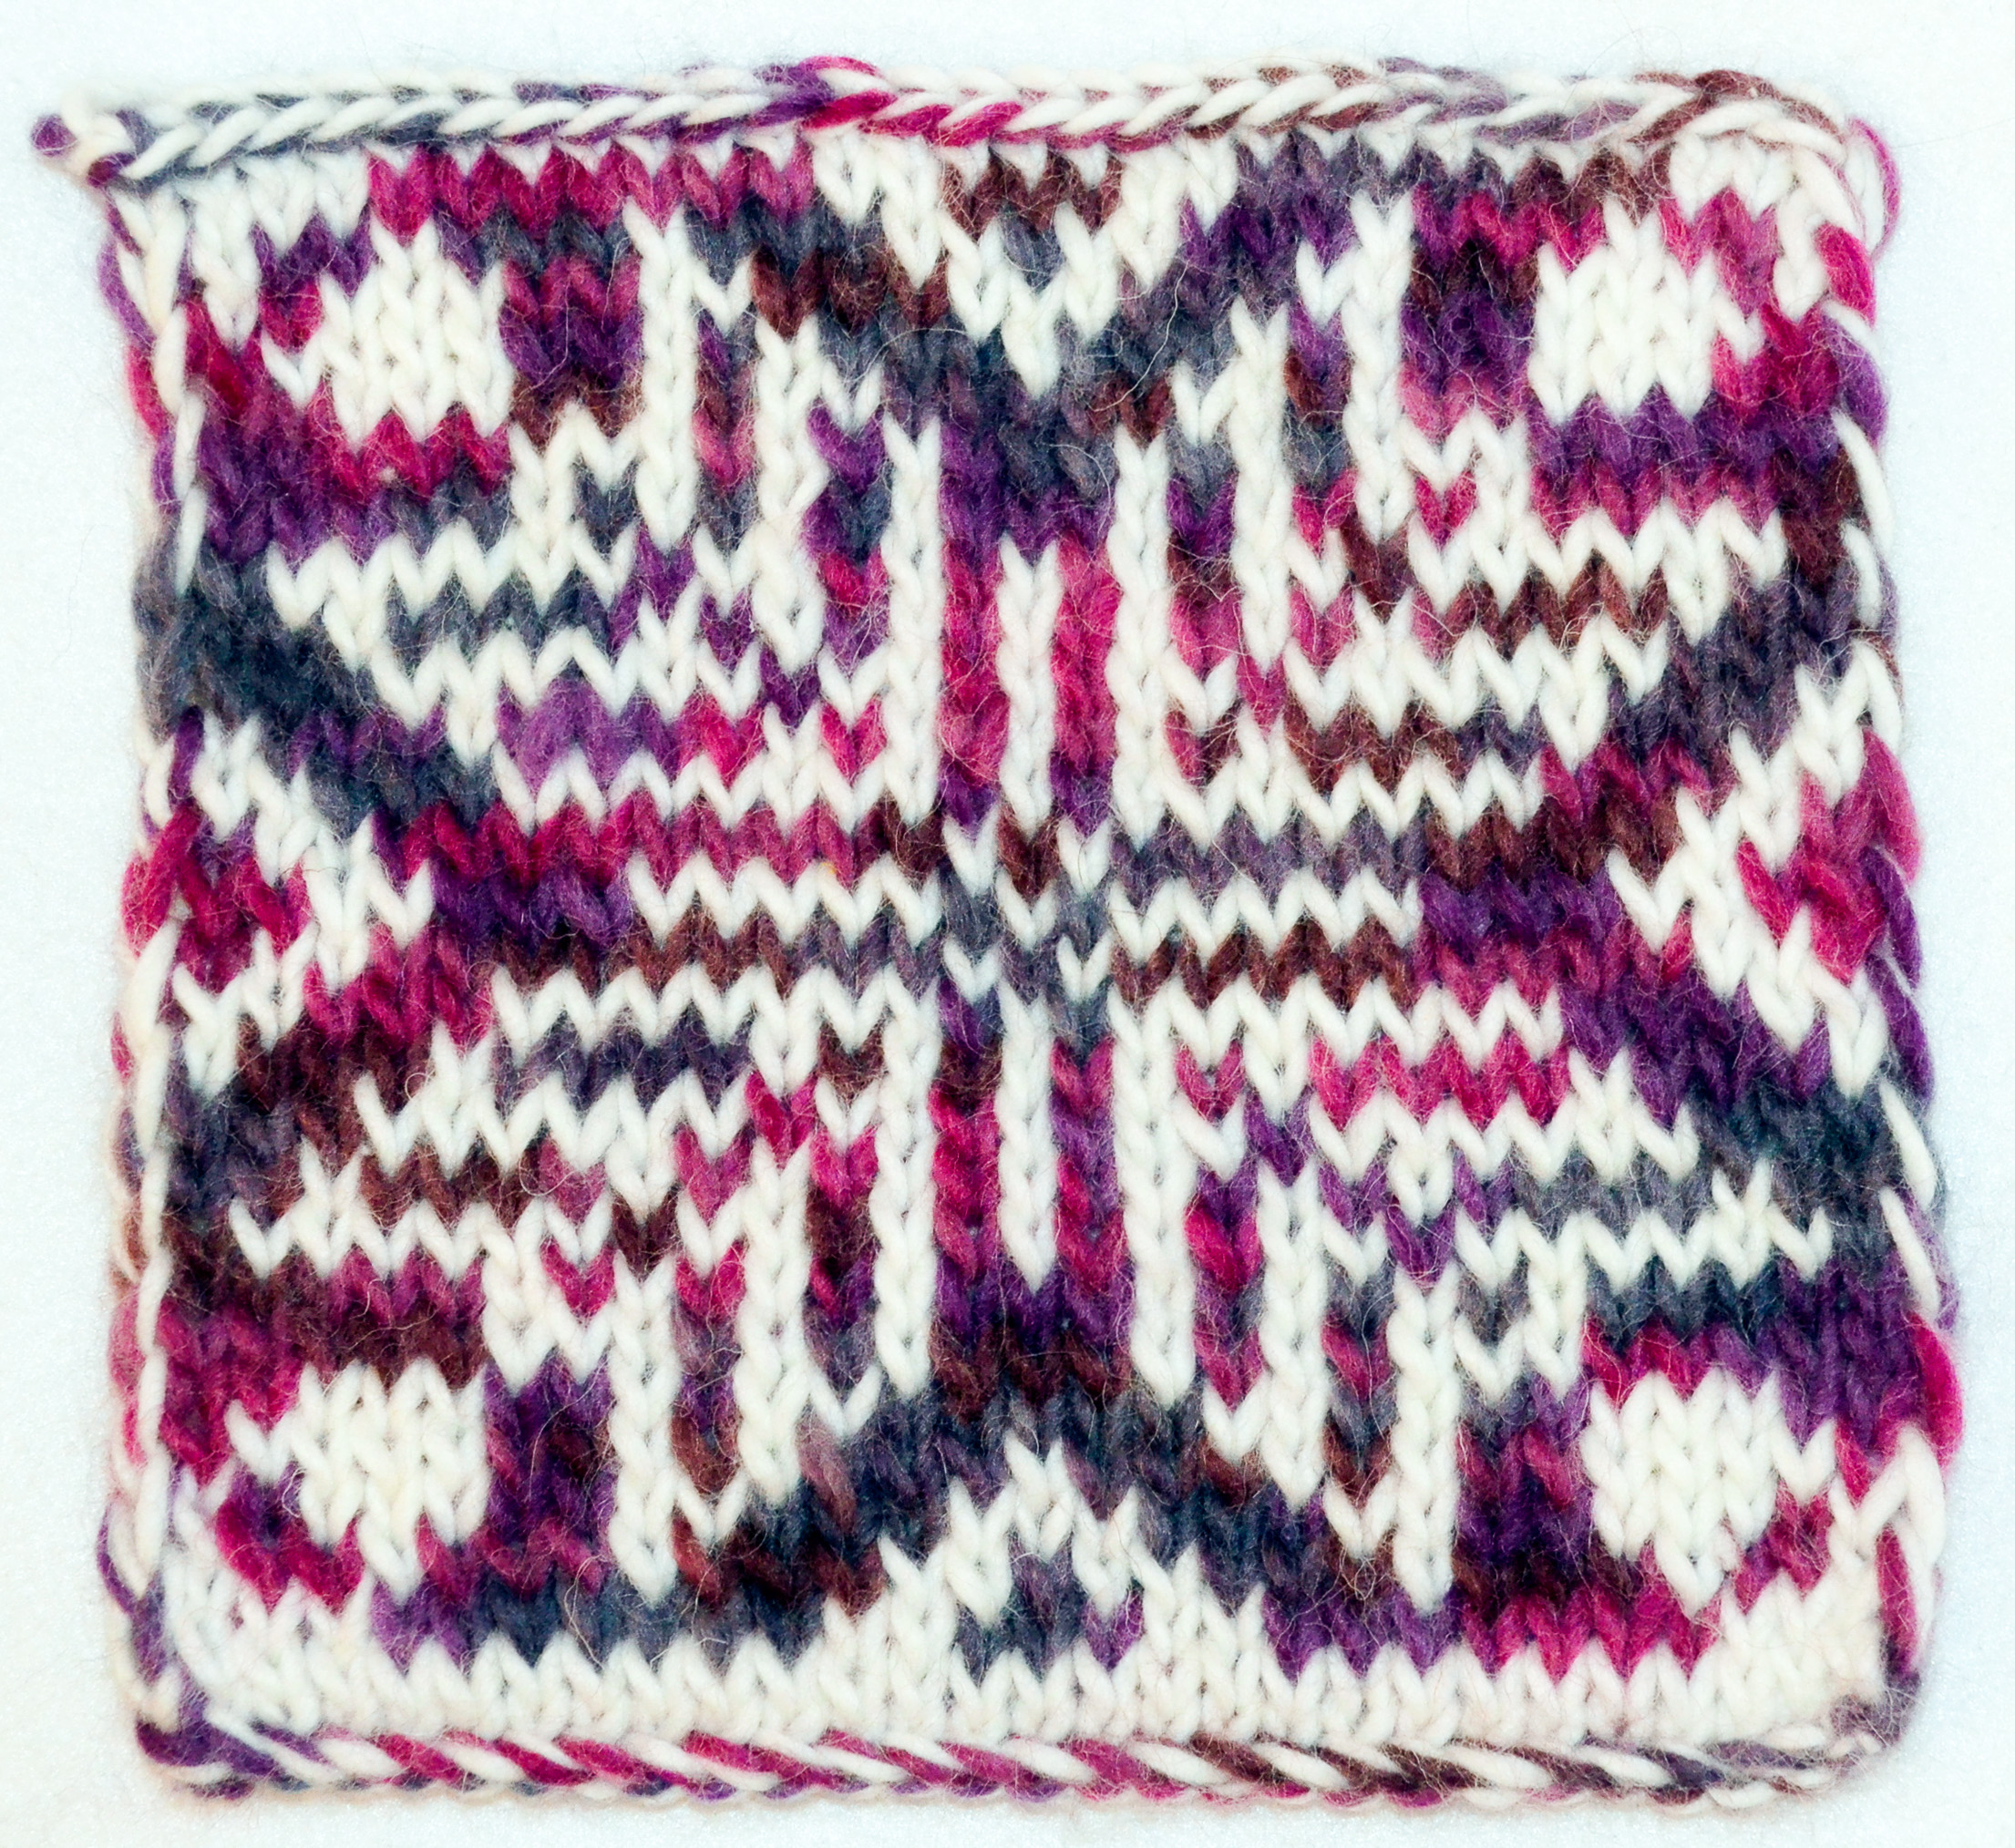 Double knit pattern - traditional motif